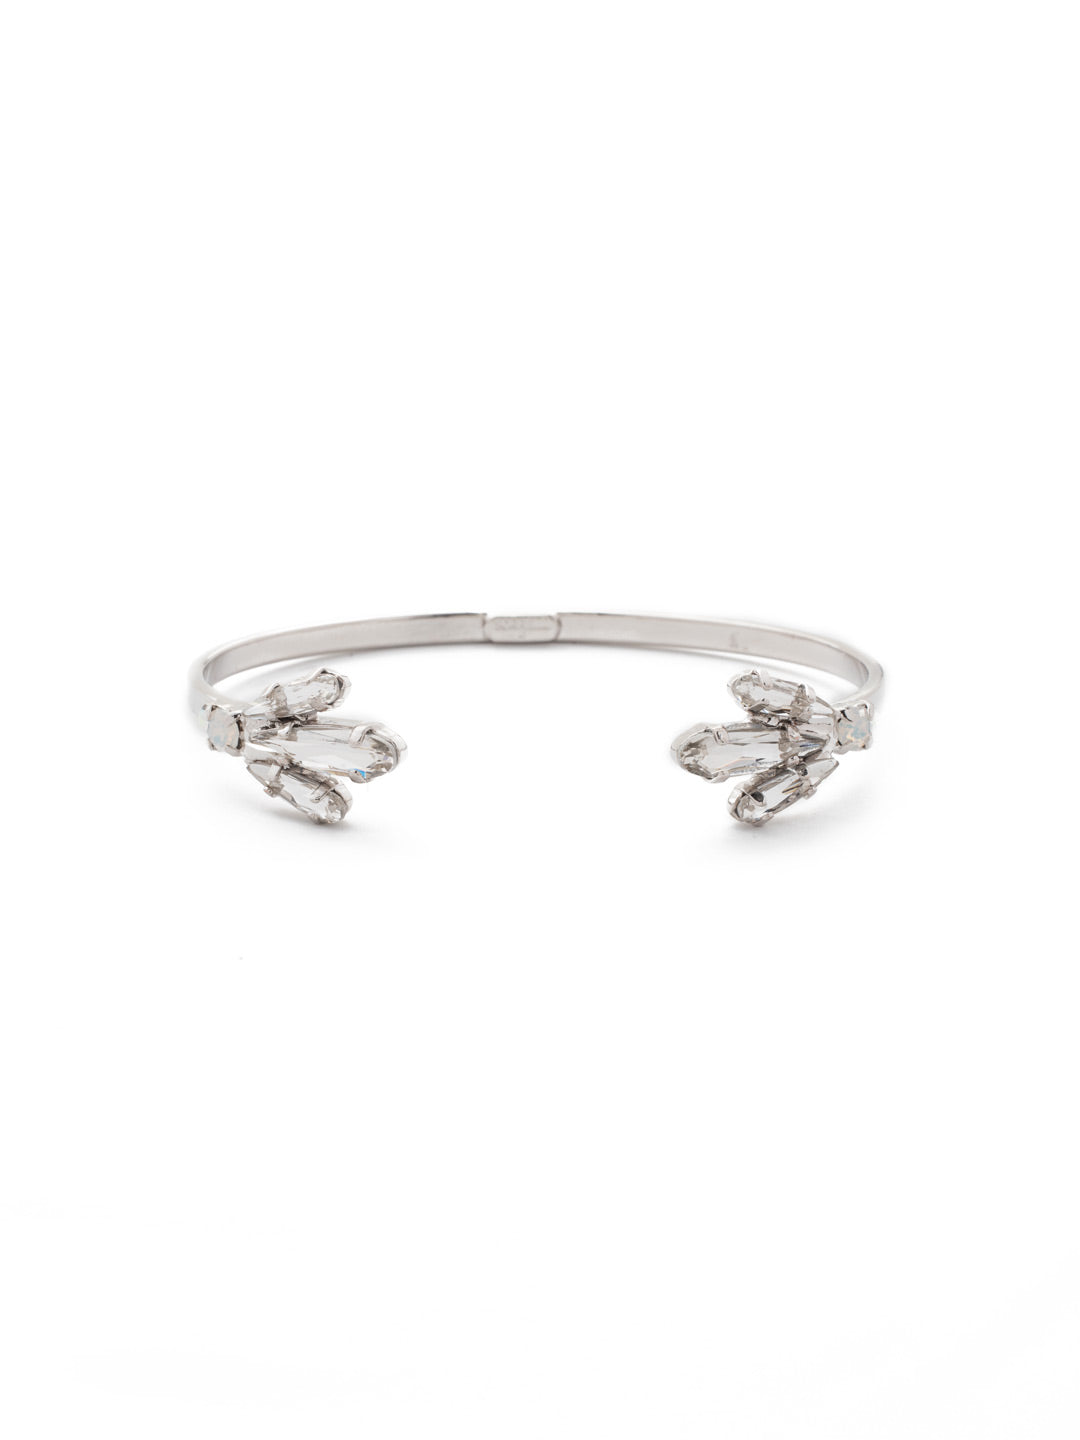 Angelica Cuff Bracelet - BDT13RHWBR - <p>A thin, metal cuff is accented by three elongated navettes for a romantic, vintage feel. From Sorrelli's White Bridal collection in our Palladium Silver-tone finish.</p>